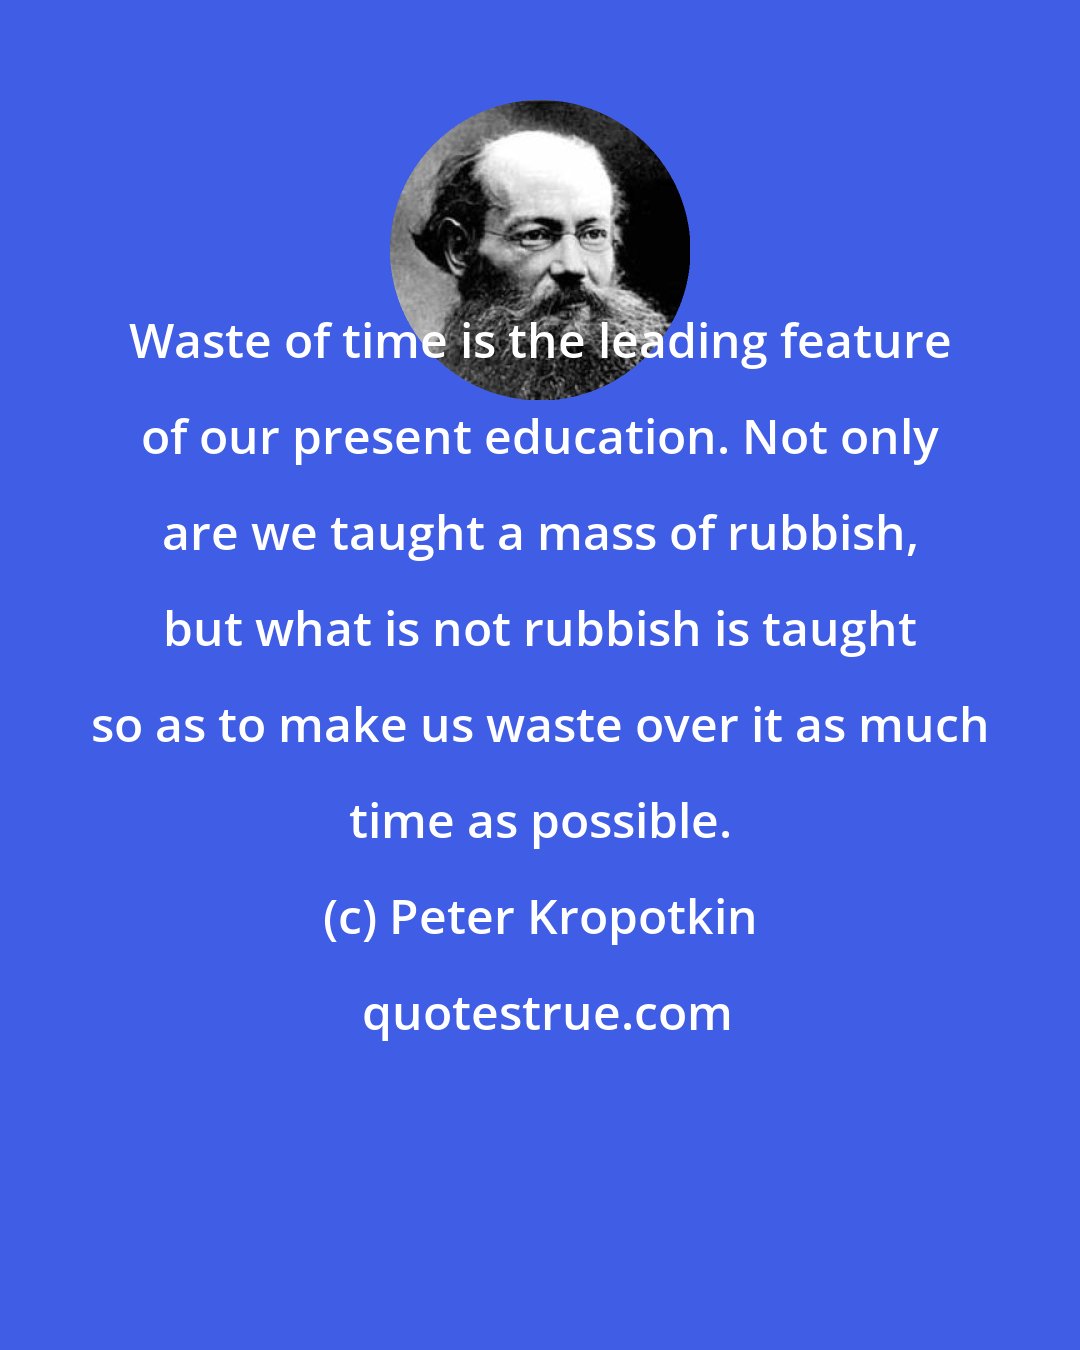 Peter Kropotkin: Waste of time is the leading feature of our present education. Not only are we taught a mass of rubbish, but what is not rubbish is taught so as to make us waste over it as much time as possible.